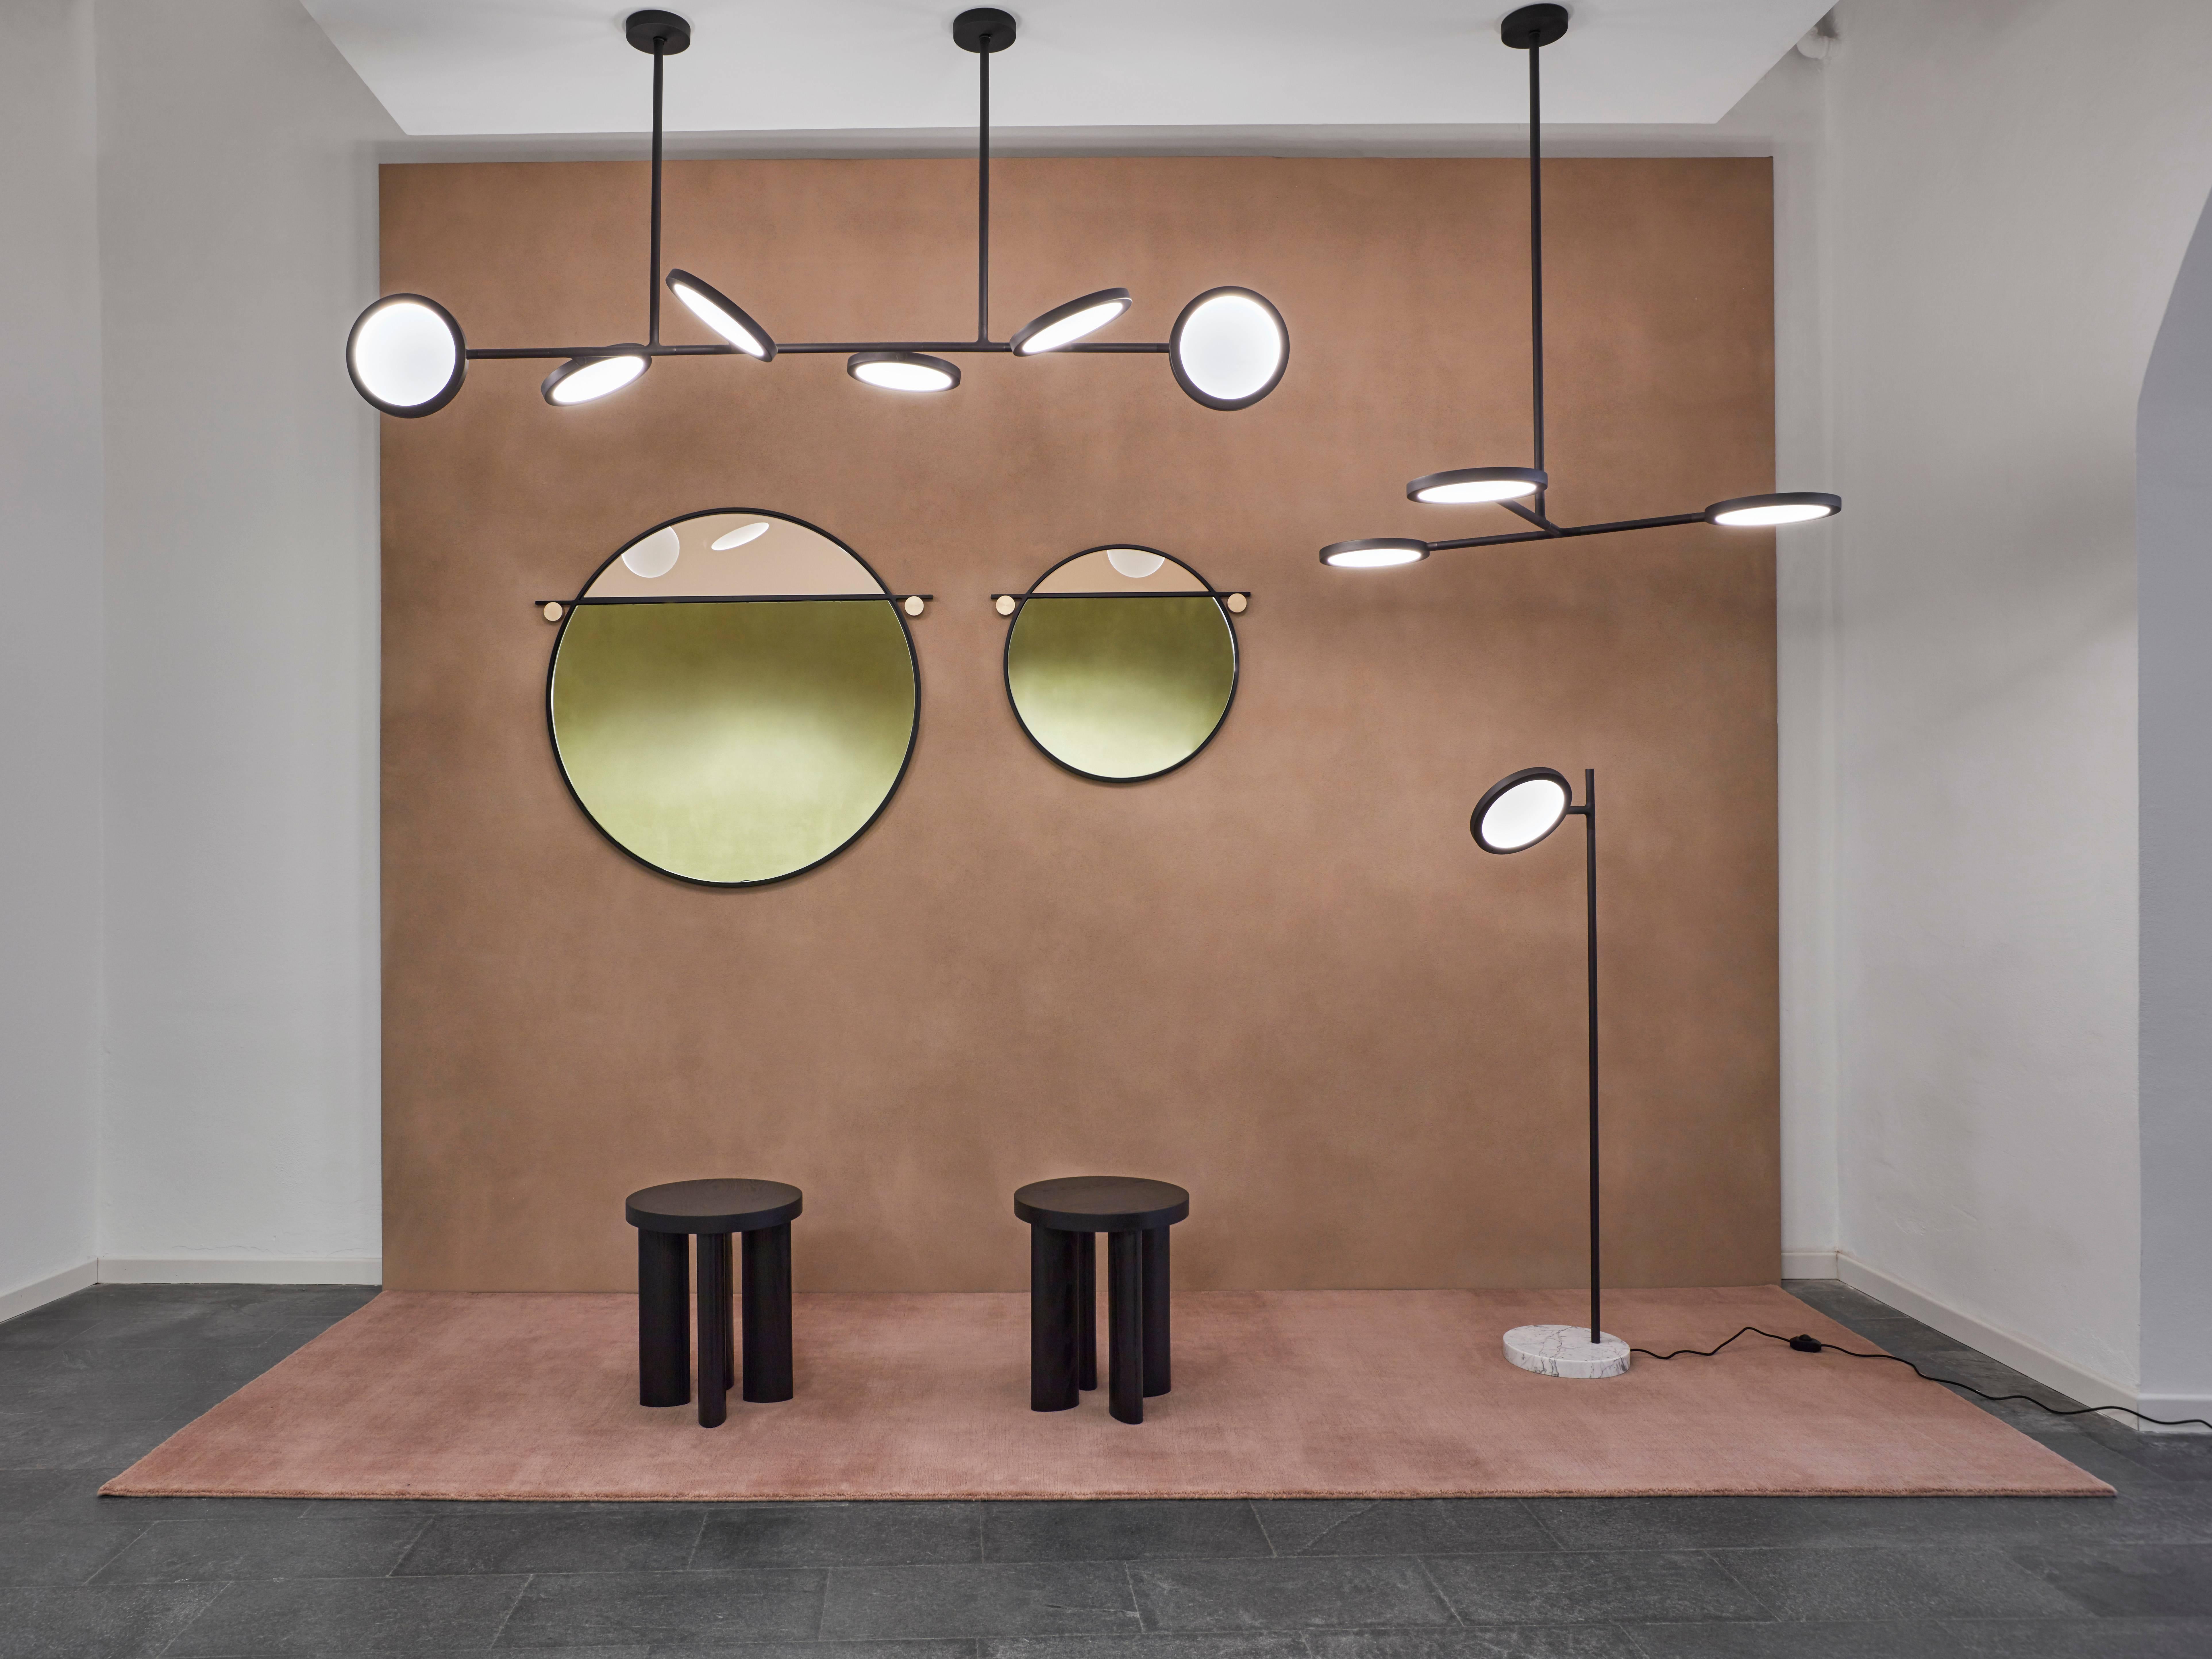 Abal consists of three simple geometries: round, capsule and rectangle. Made in generous proportions, each mirror is visually segmented by a steel frame dividing the mirror from a panel of painted glass.